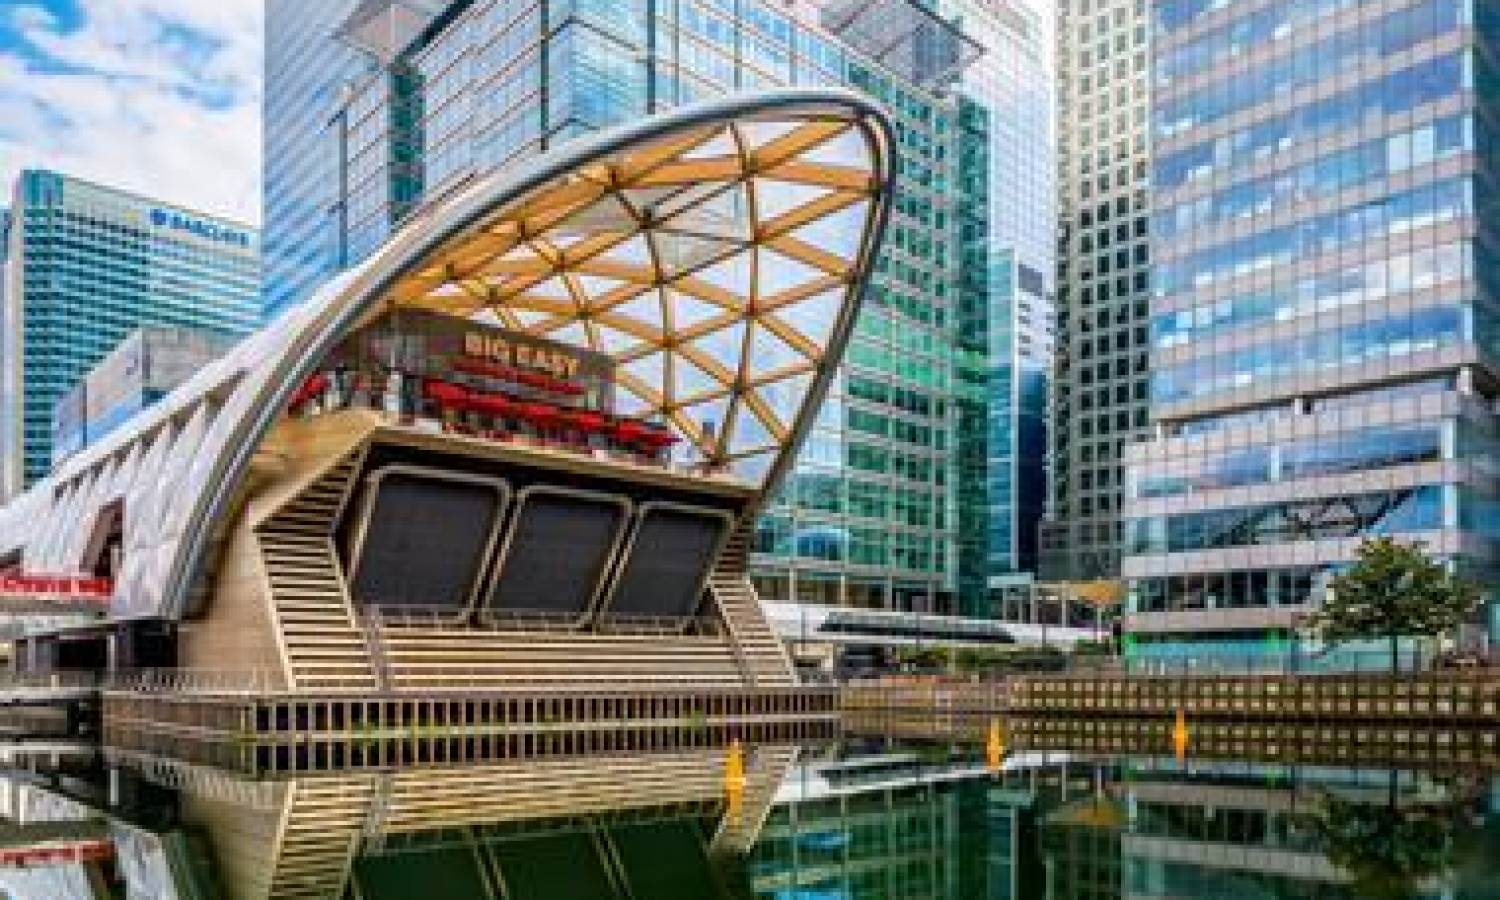 Canary Wharf submits plans for site next to Crossrail station